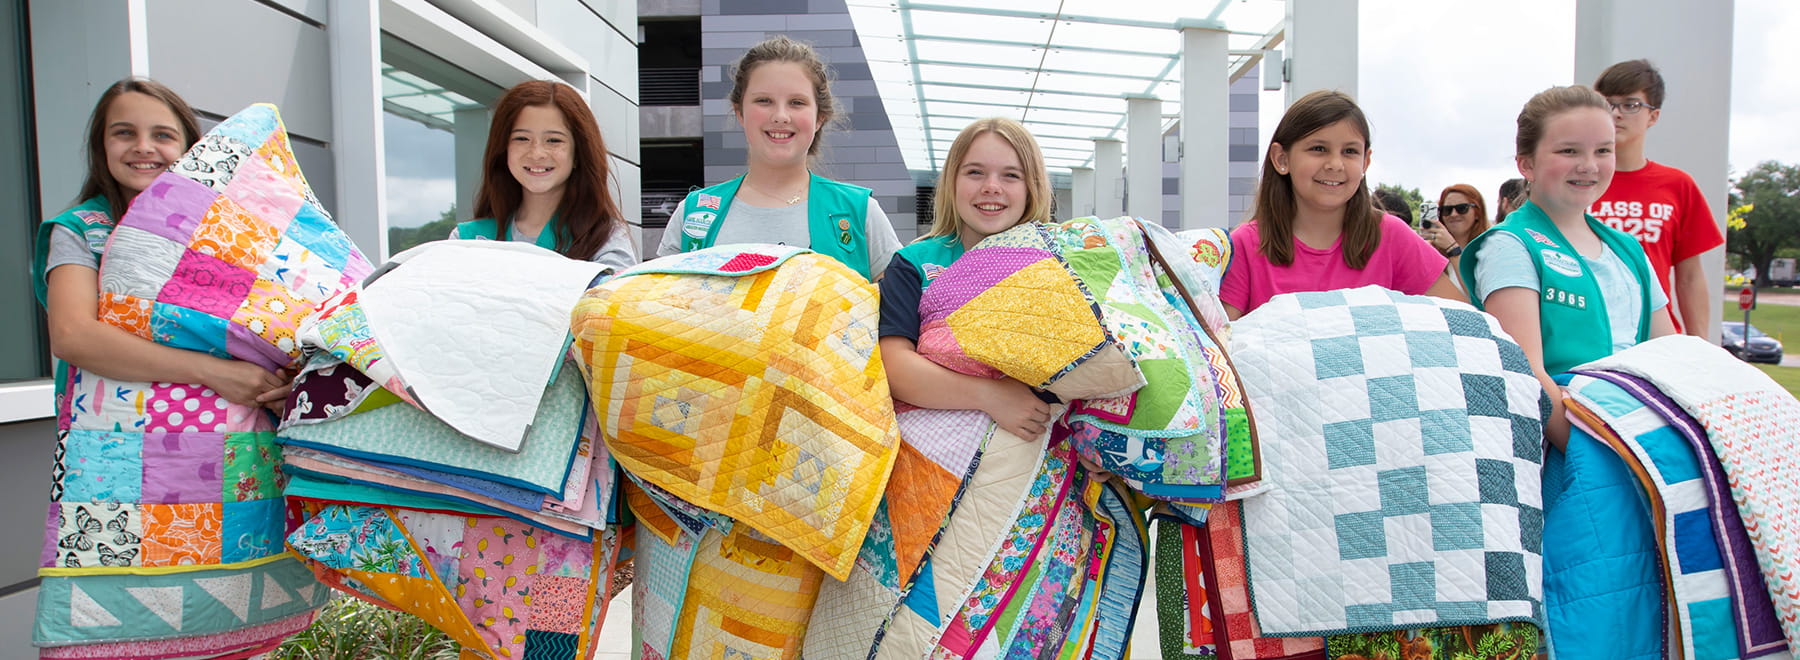 Holding armloads of handmade quilts for babies in neonatal intensive care, Girl Scouts in Troop 3965 include, from left, Zoey Dowdy, Presleigh Stigler, Nichole Johnson, Maggie Josey, Ellie Kegley and Katey Rae Quick.